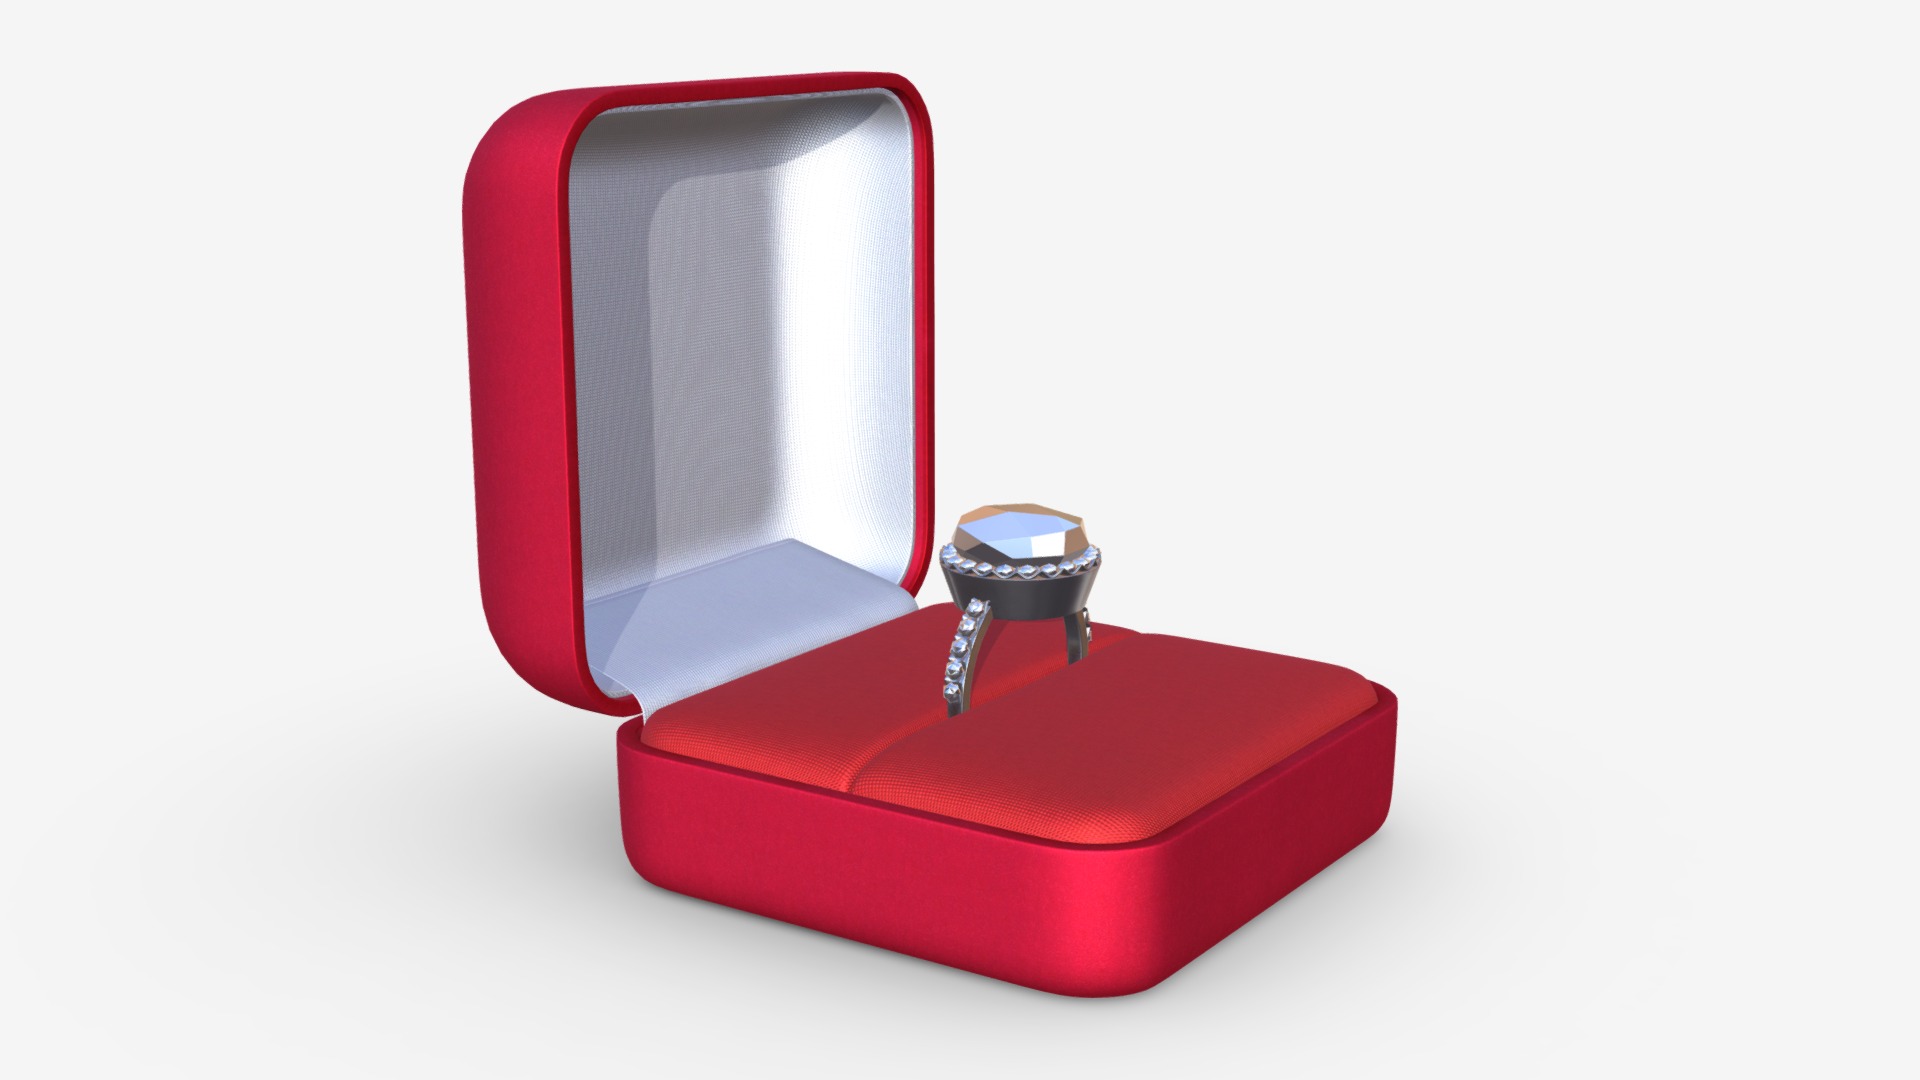 3D model wedding ring in a square box - This is a 3D model of the wedding ring in a square box. The 3D model is about a red and white computer tower.